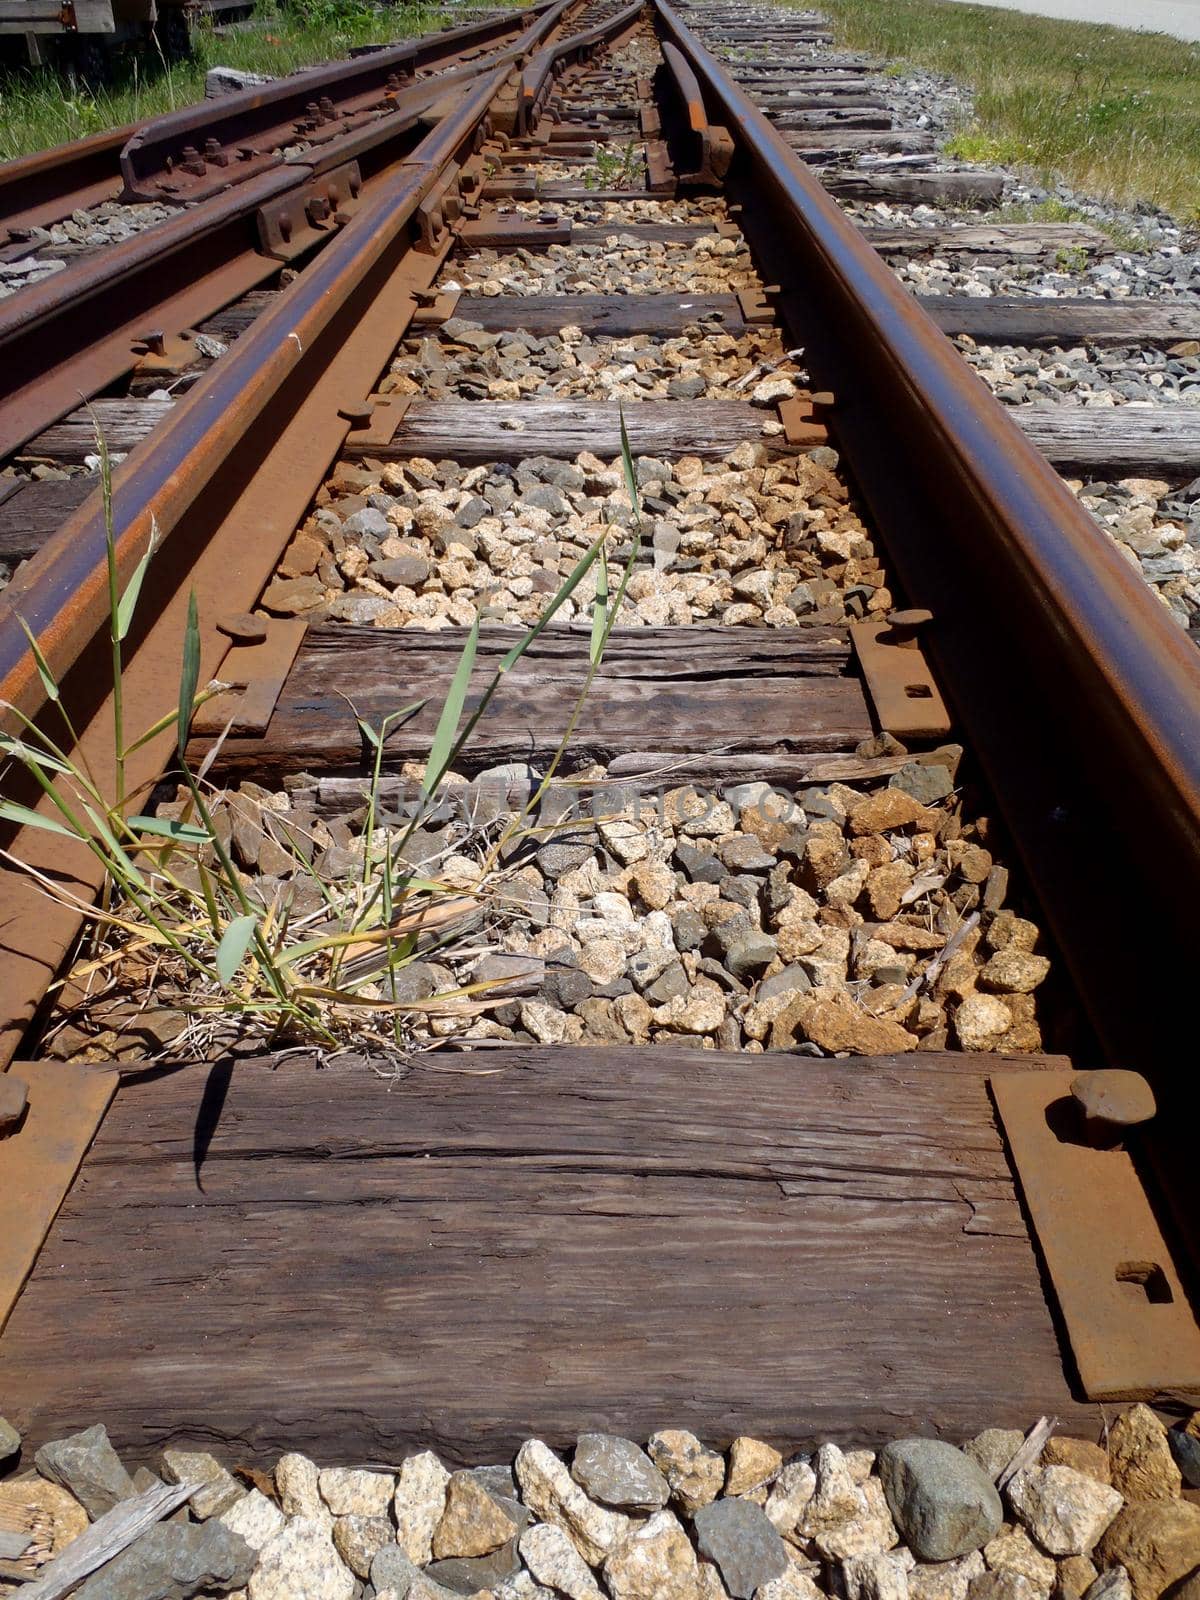 Railroad tracks running into distance with a track switch with grass growing and rocks in between tracks